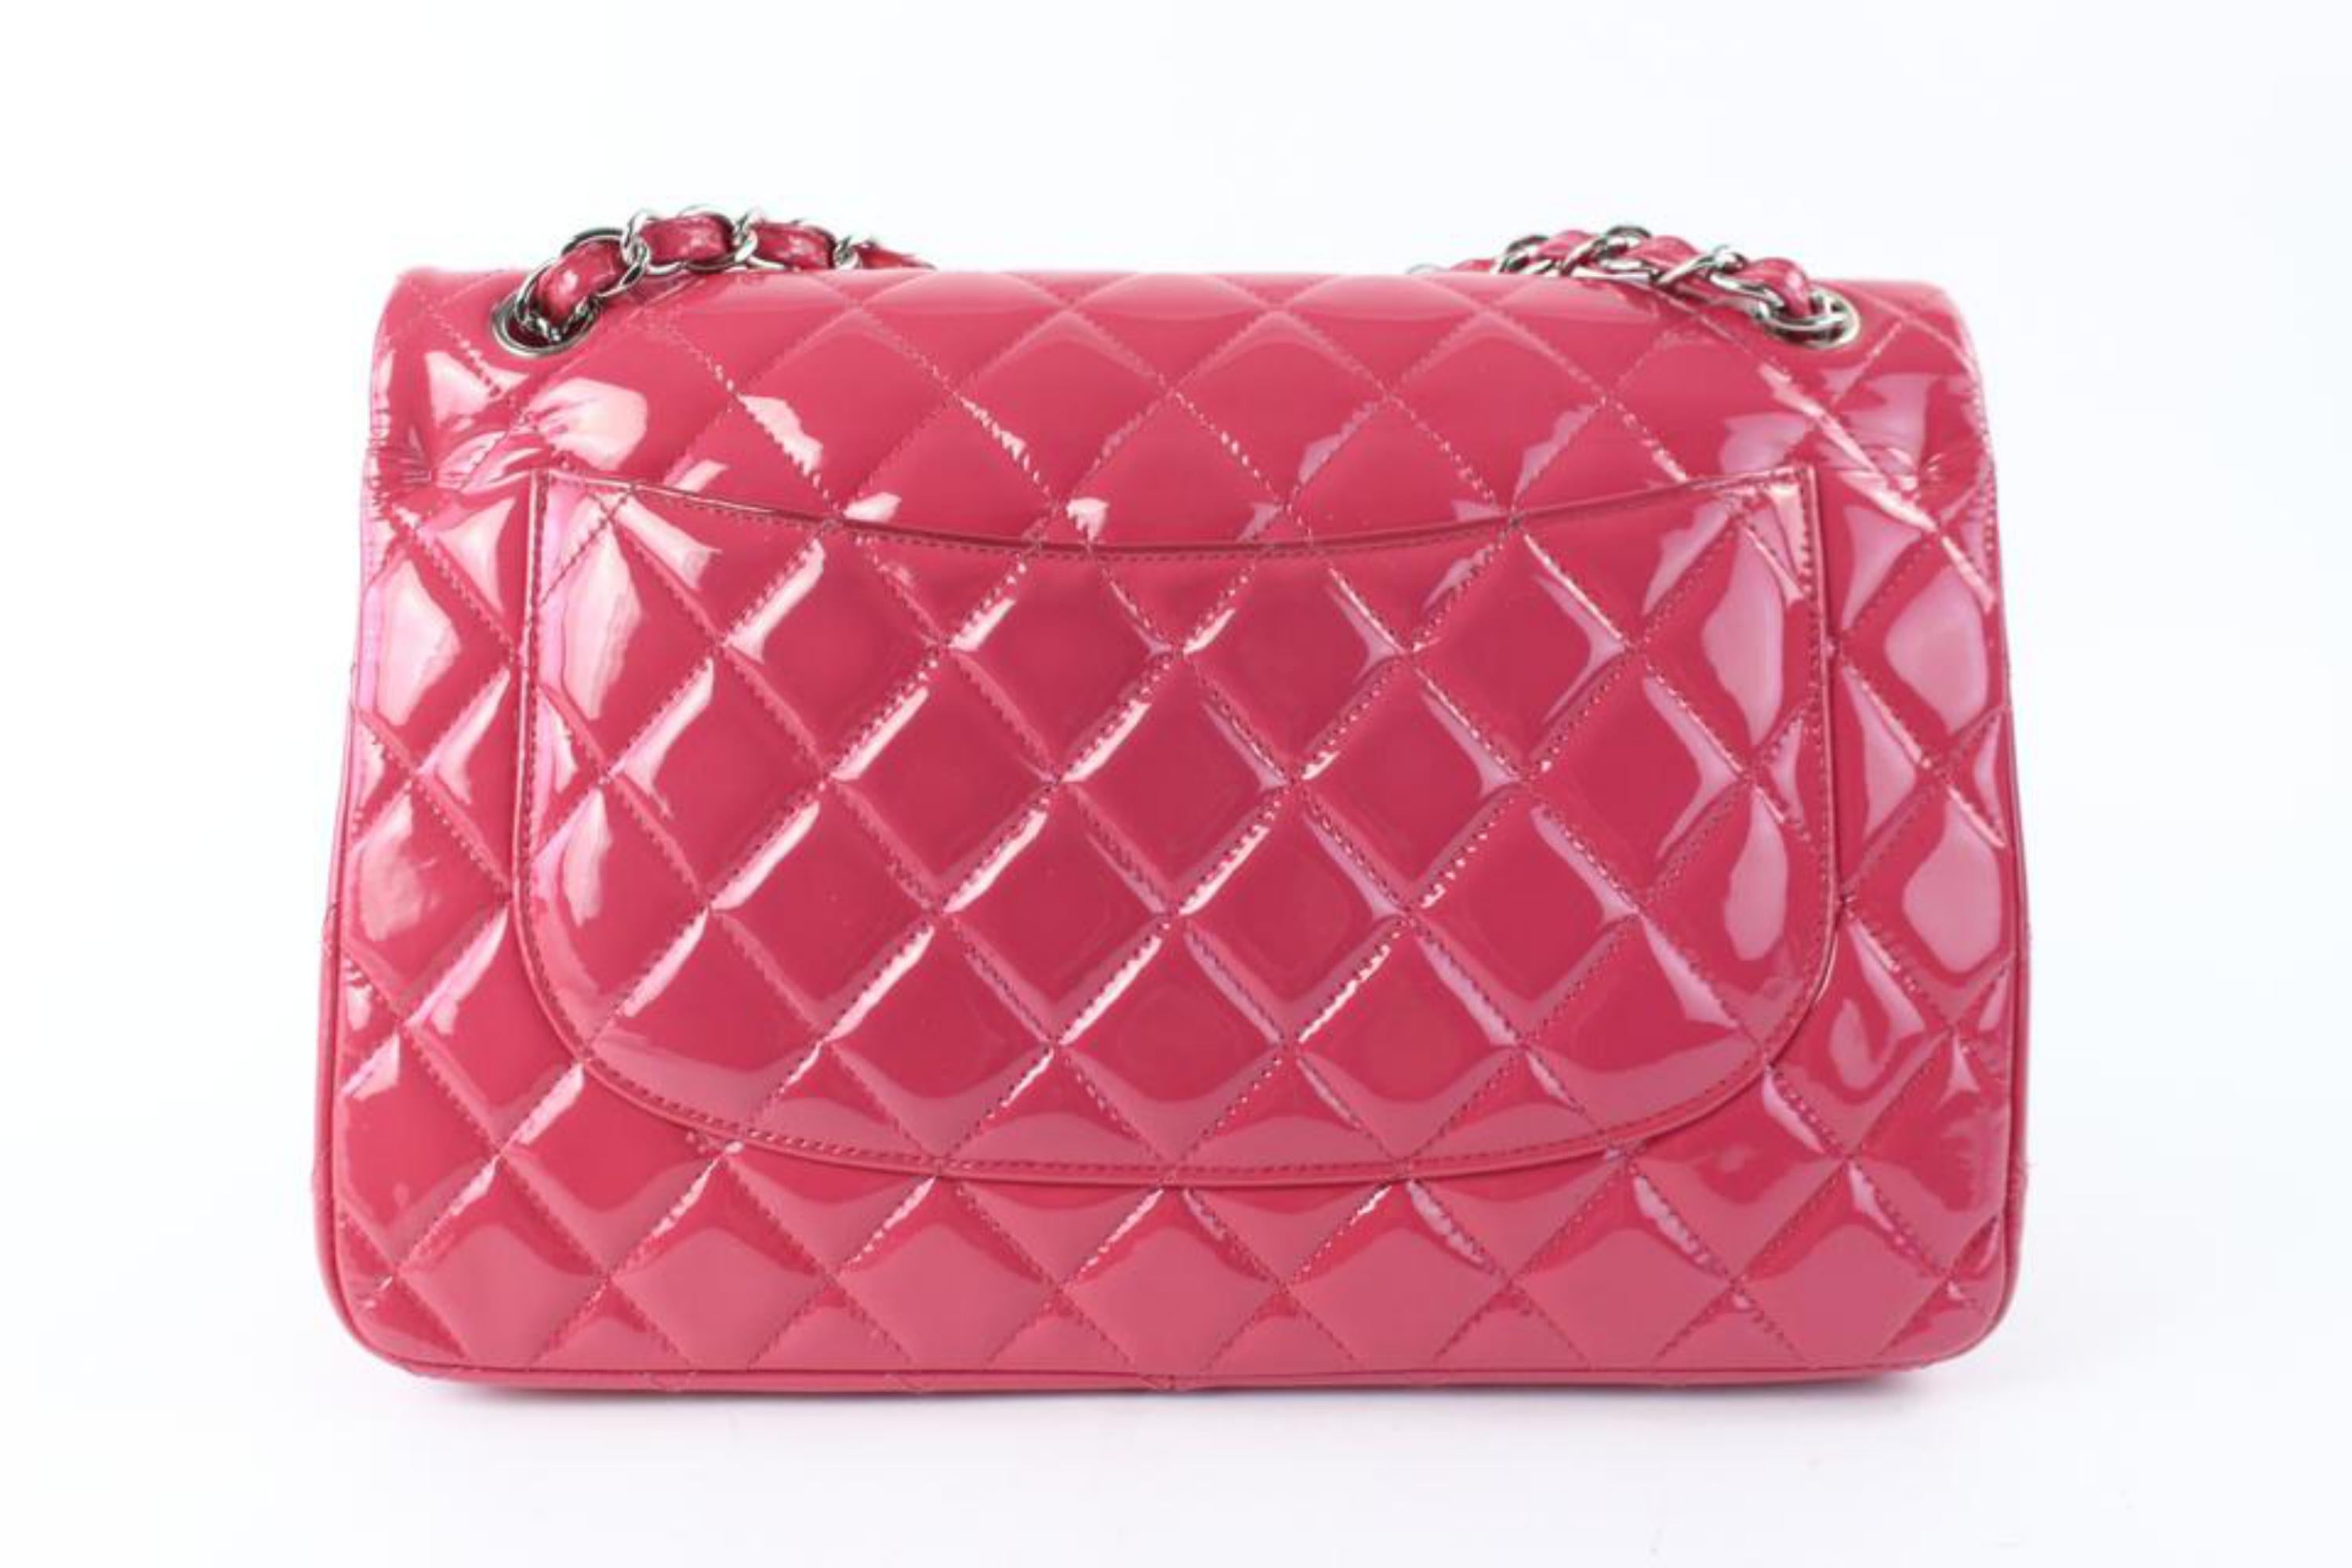 Chanel Classic Quilted Jumbo Flap 01cz0720 Dark Pink Patent Leather Shoulder Bag 4